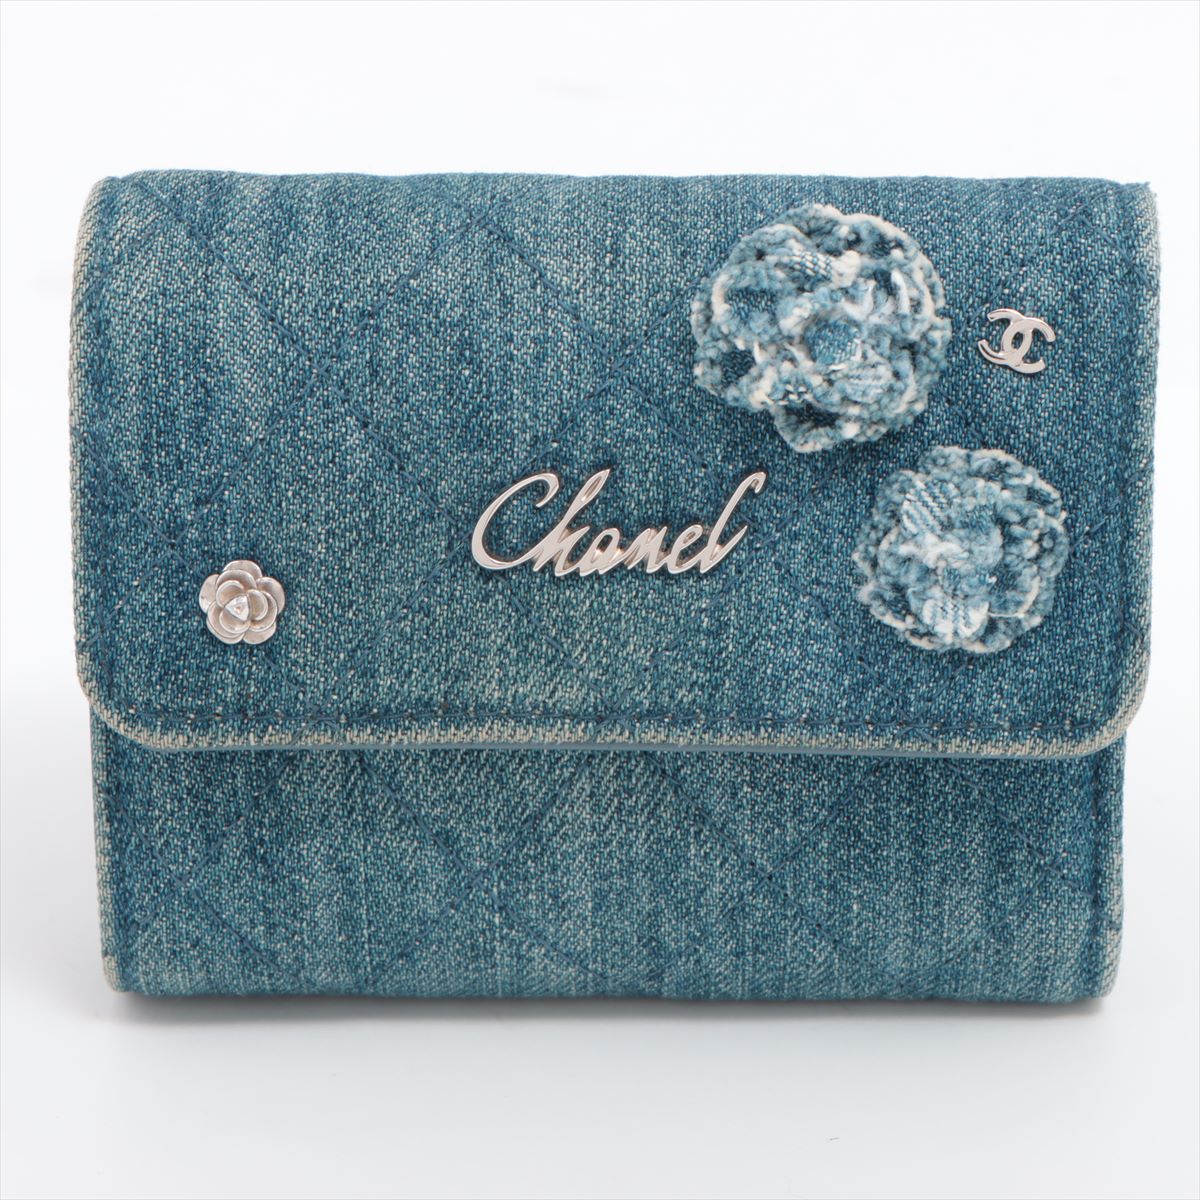 Chanel Camelia Denim Compact Wallet Blue Silver Metal fittings 27415462